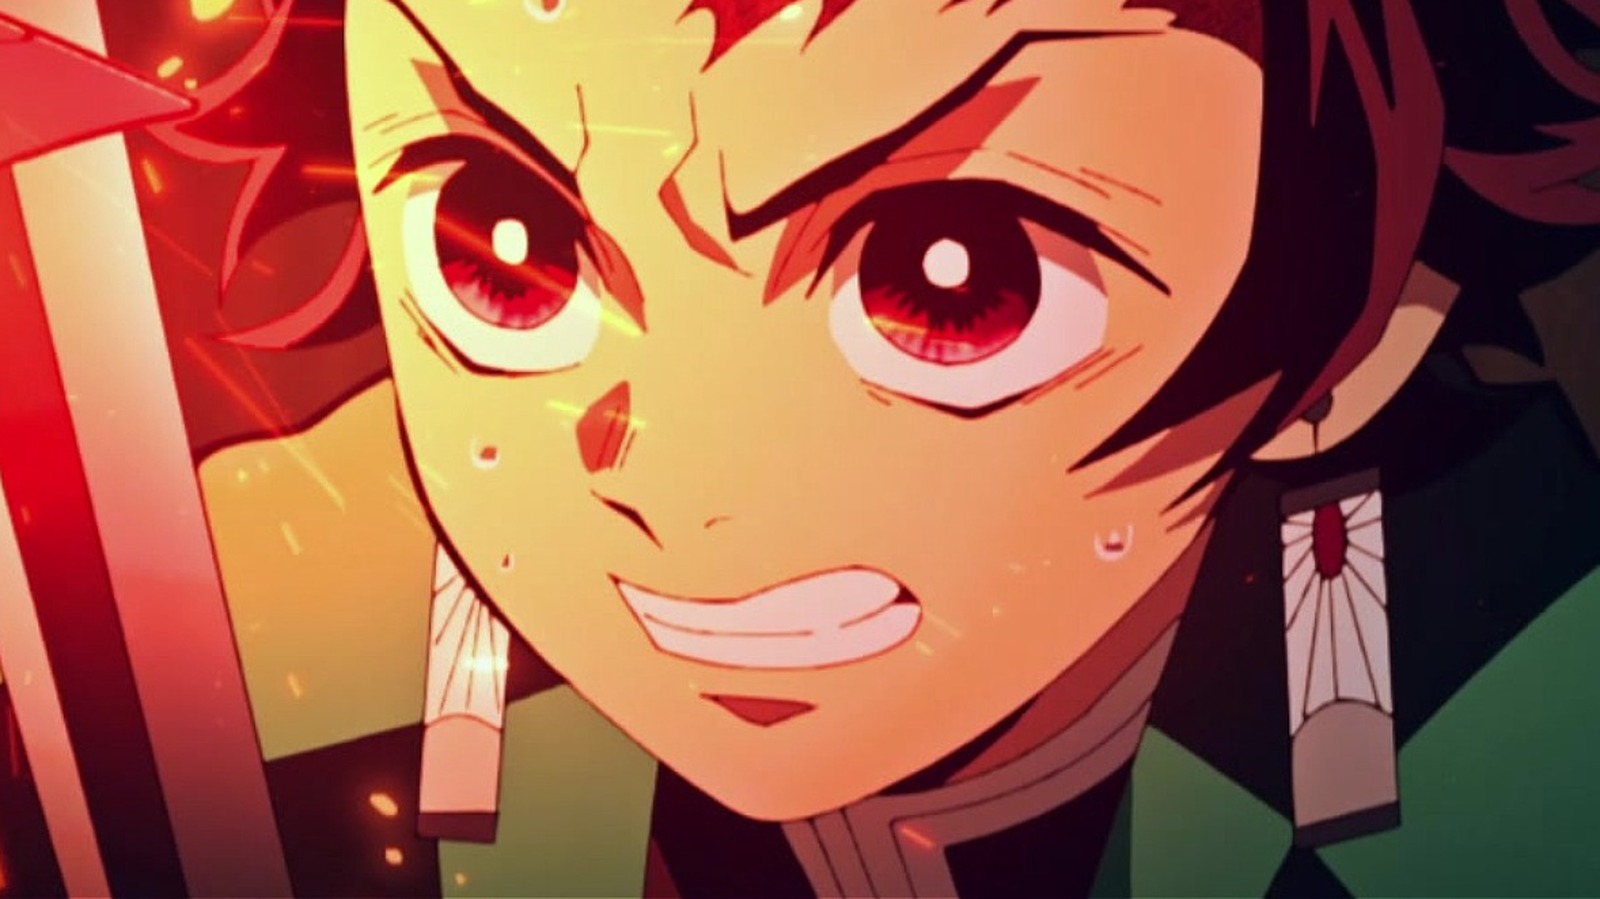 Prepare for Demon Slayer season 3: The ultimate guide to watching